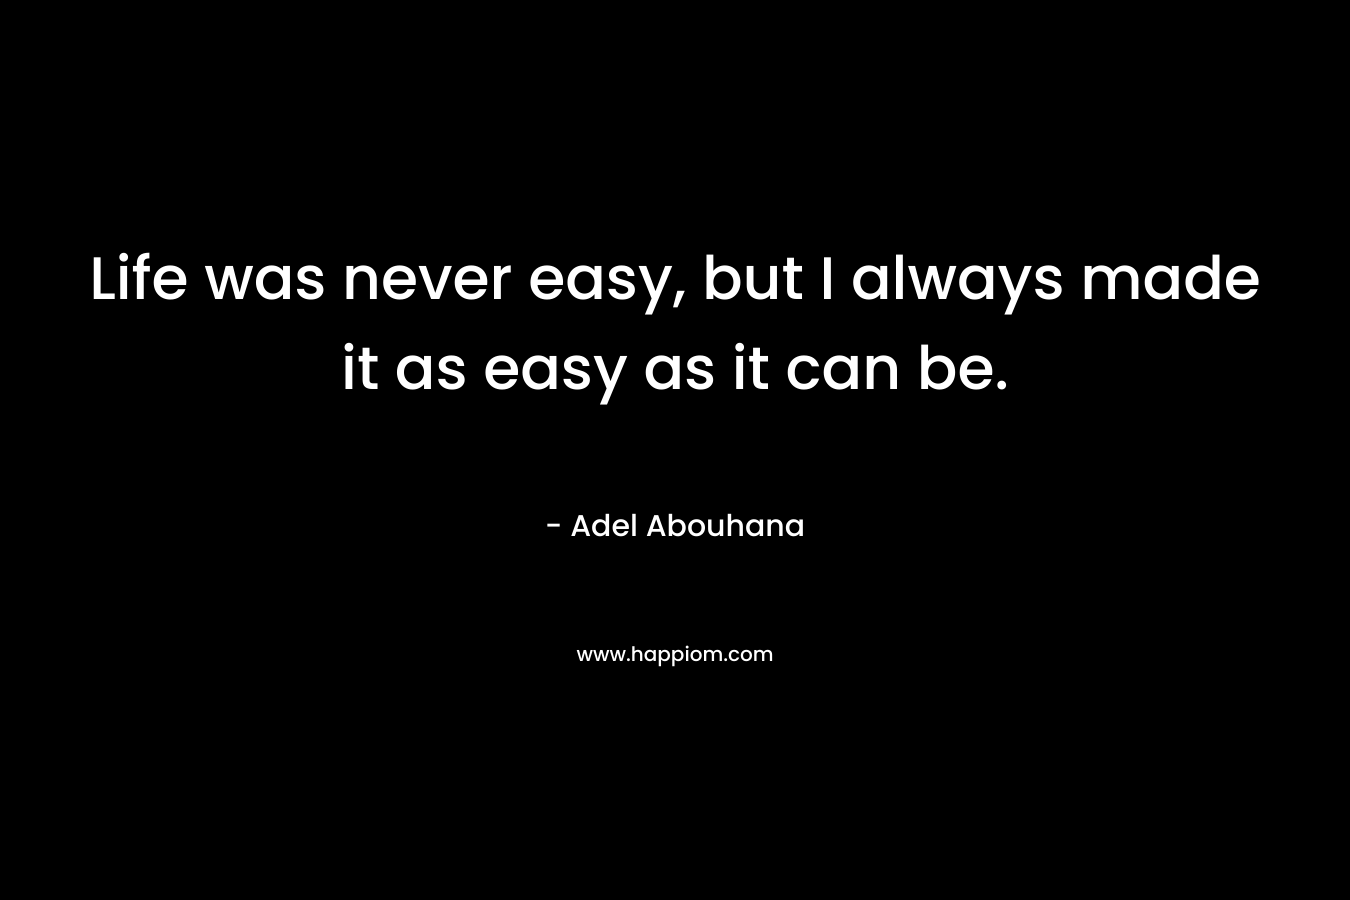 Life was never easy, but I always made it as easy as it can be.